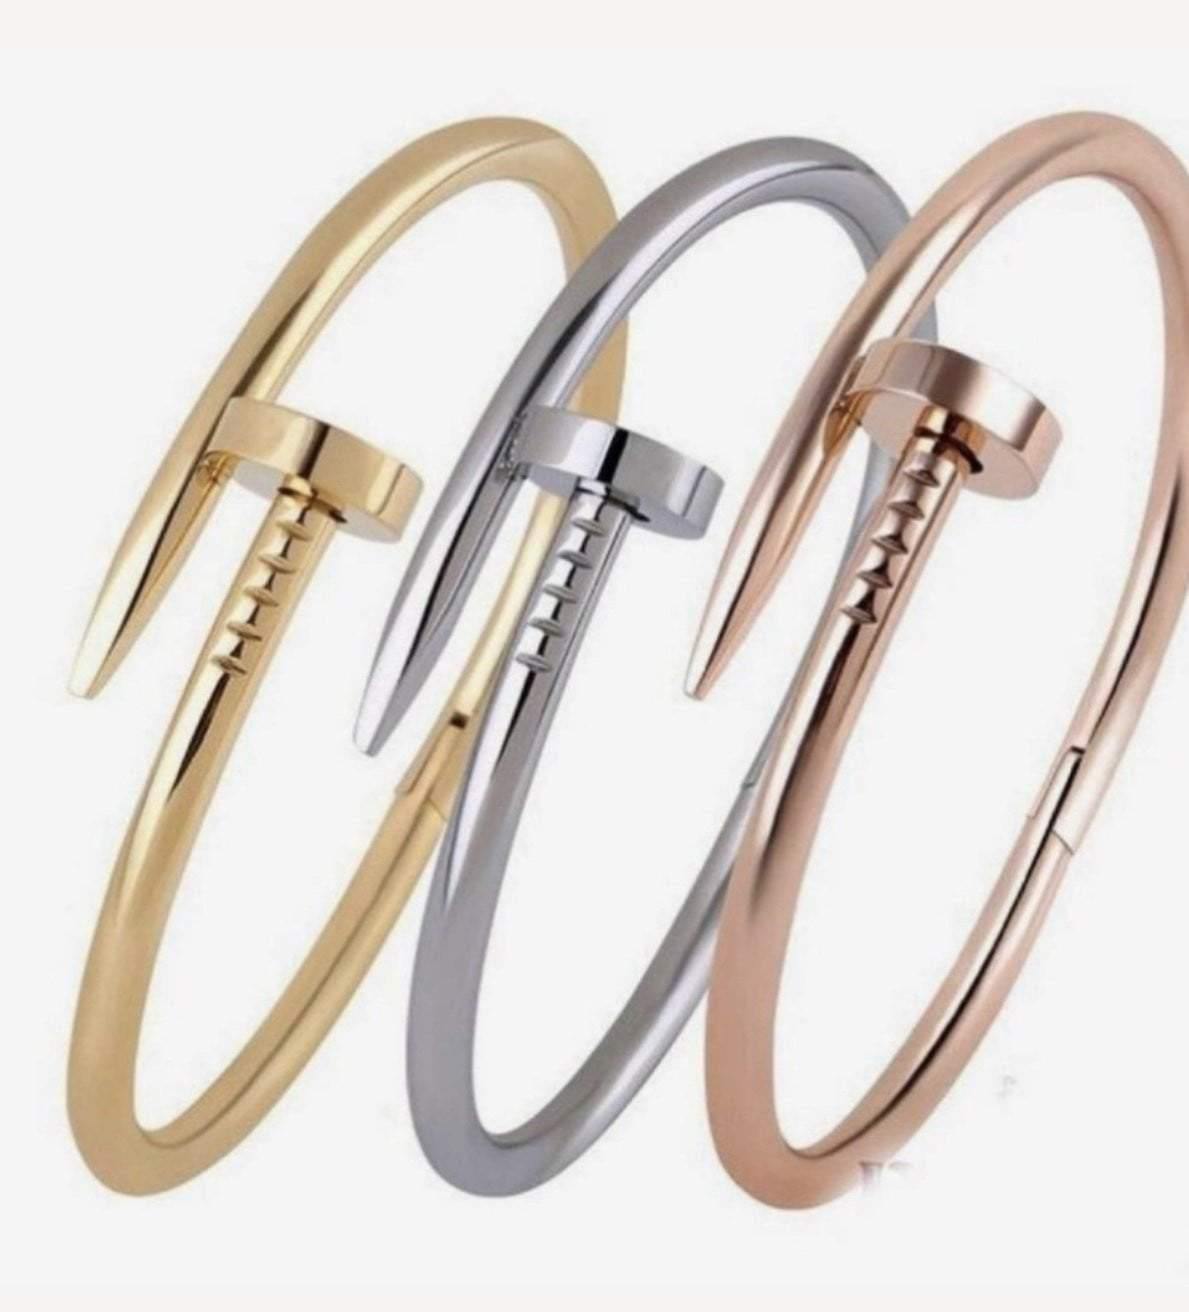 Set Of 3 Silver, Gold, or Rose Gold Nail Cuff On Screw Bracelet Nail Bangle